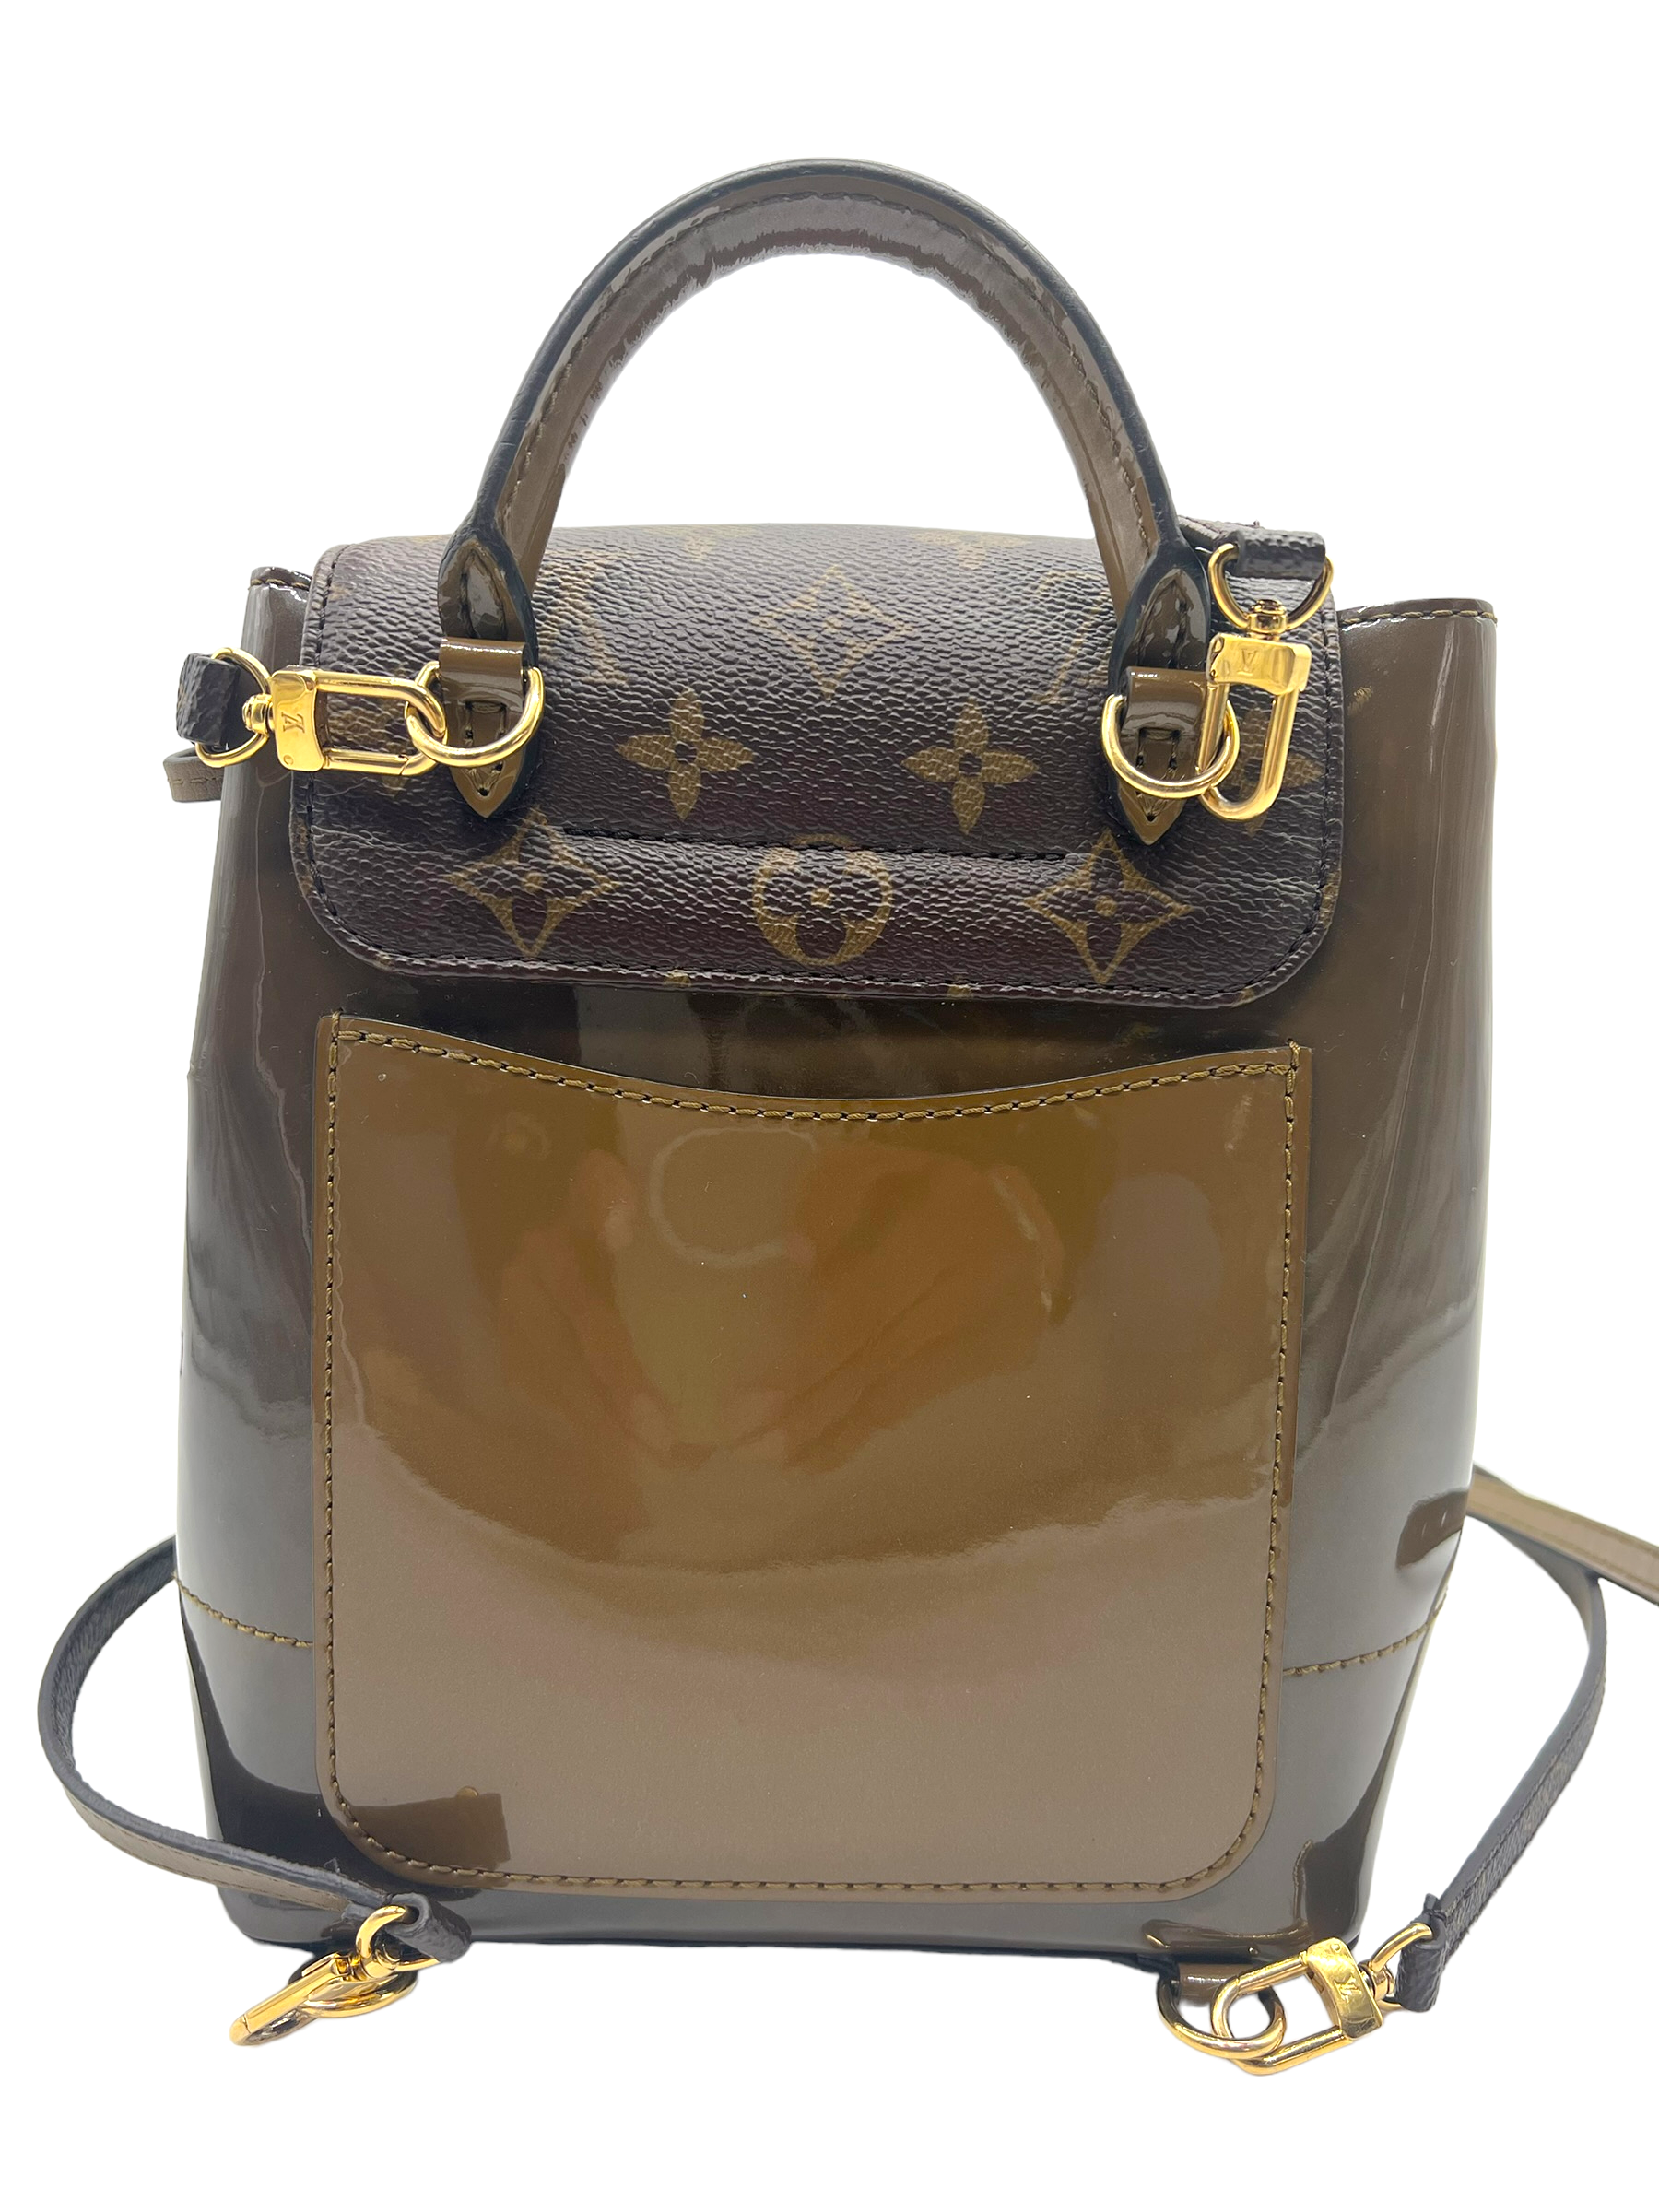 Louis Vuitton Murray Mini 871016 Green-gold Monogram Vernis Leather Backpack